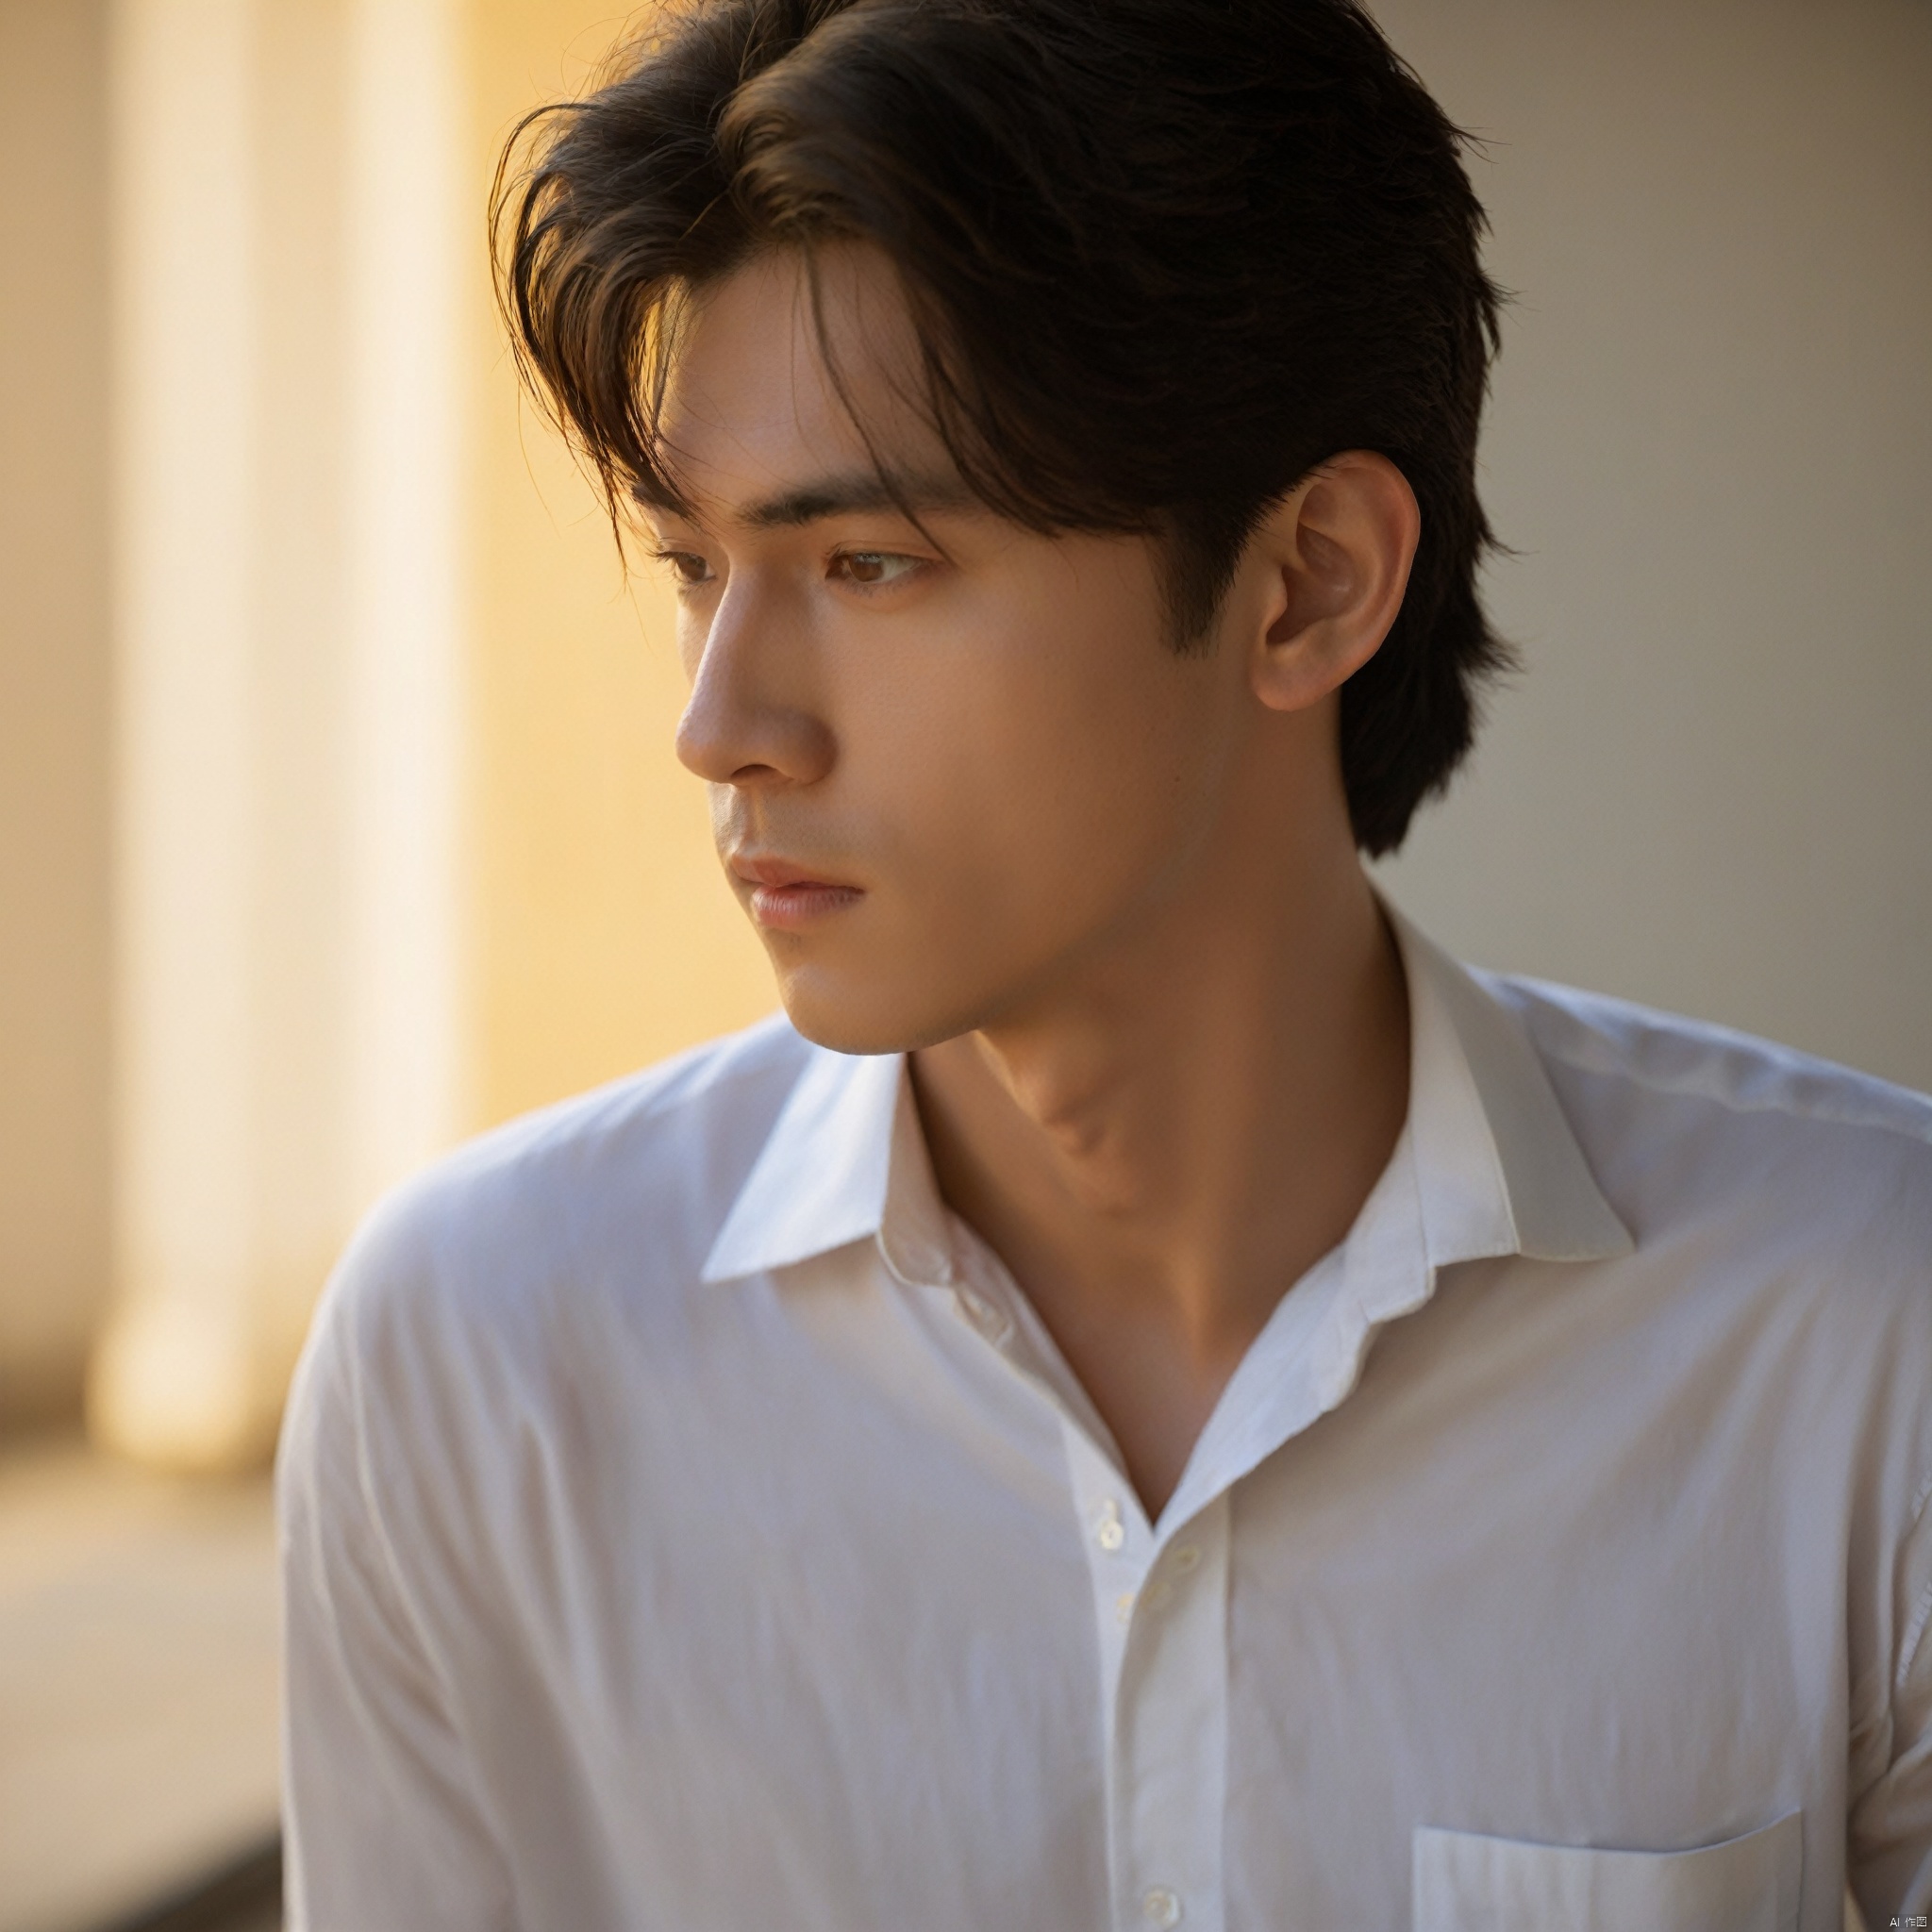 A young man with a firm and deep gaze, as if he can see into the soul. His hair is neatly combed, revealing a clear profile. He wears a simple shirt with the collar slightly open, exuding a casual charm. Sunlight casts a warm shadow on his face from the side, making him appear mature and charming.